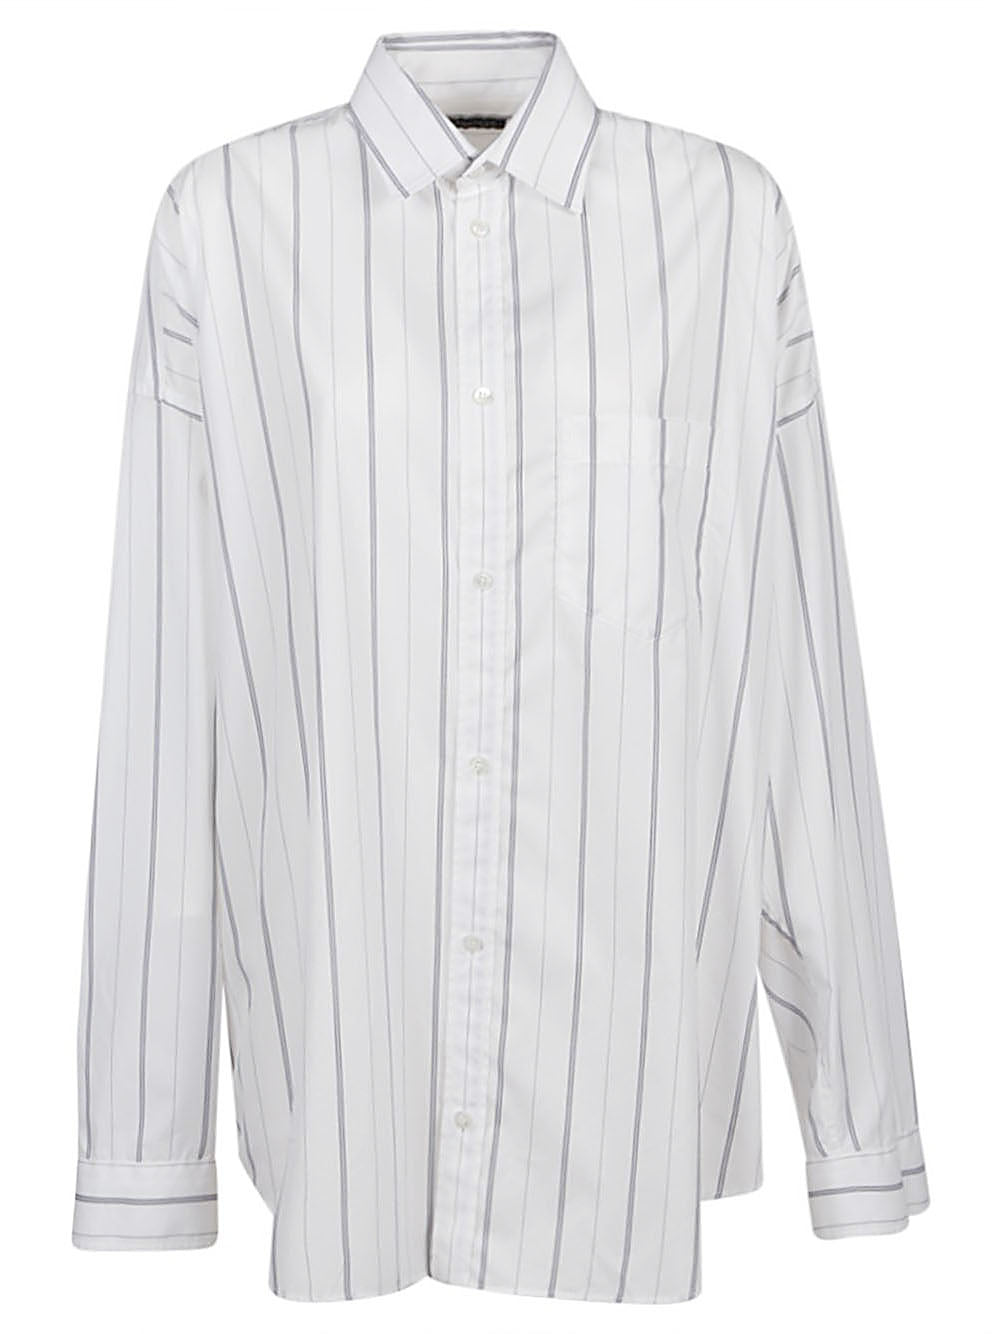 BALENCIAGA Women's Striped Cotton Shirt with Pointed Collar and Long Sleeves